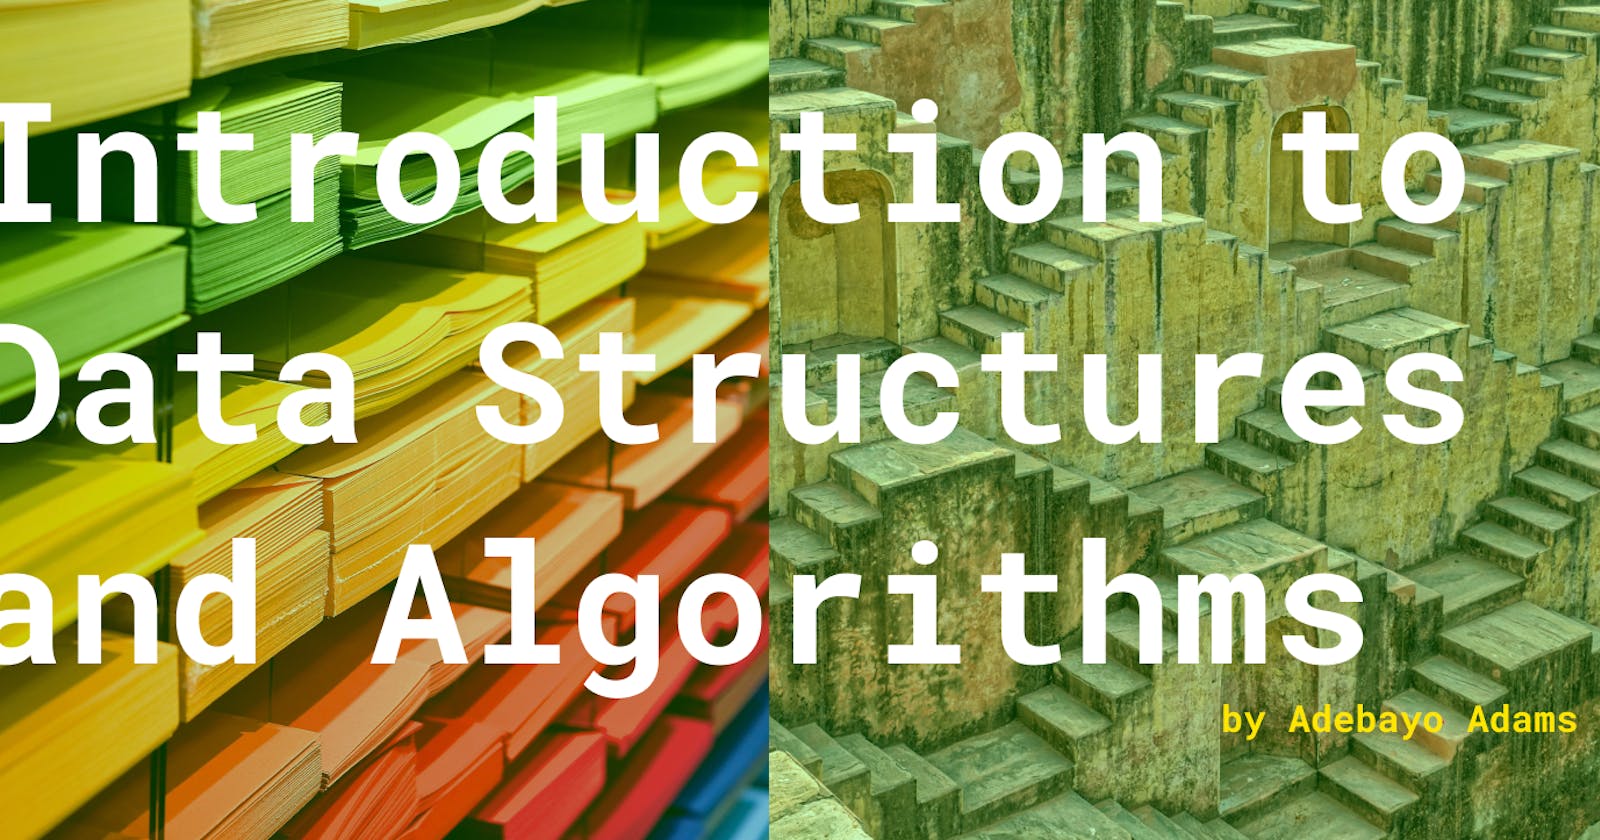 Introduction to Data Structures and Algorithms